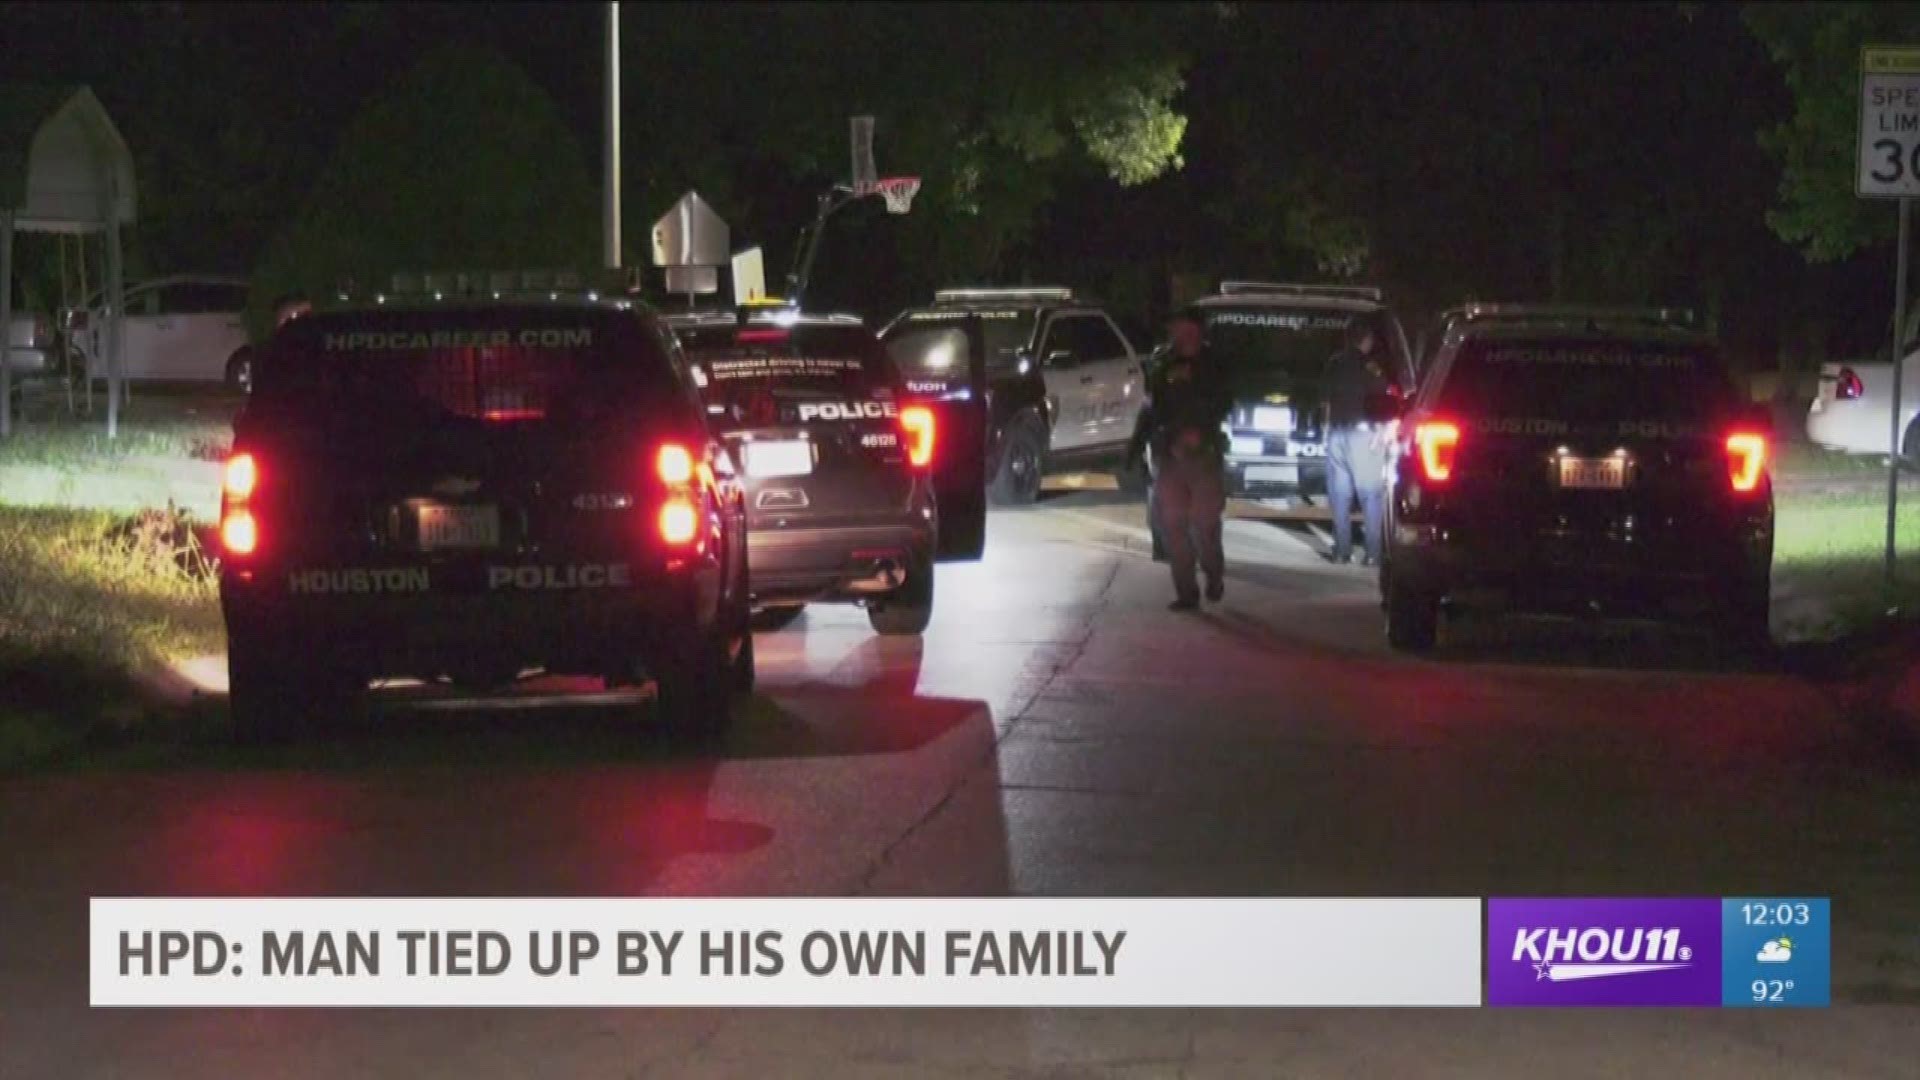 A man was tied up by his own family members in a home invasion in southeast Houston, according to the Houston Police Department. 